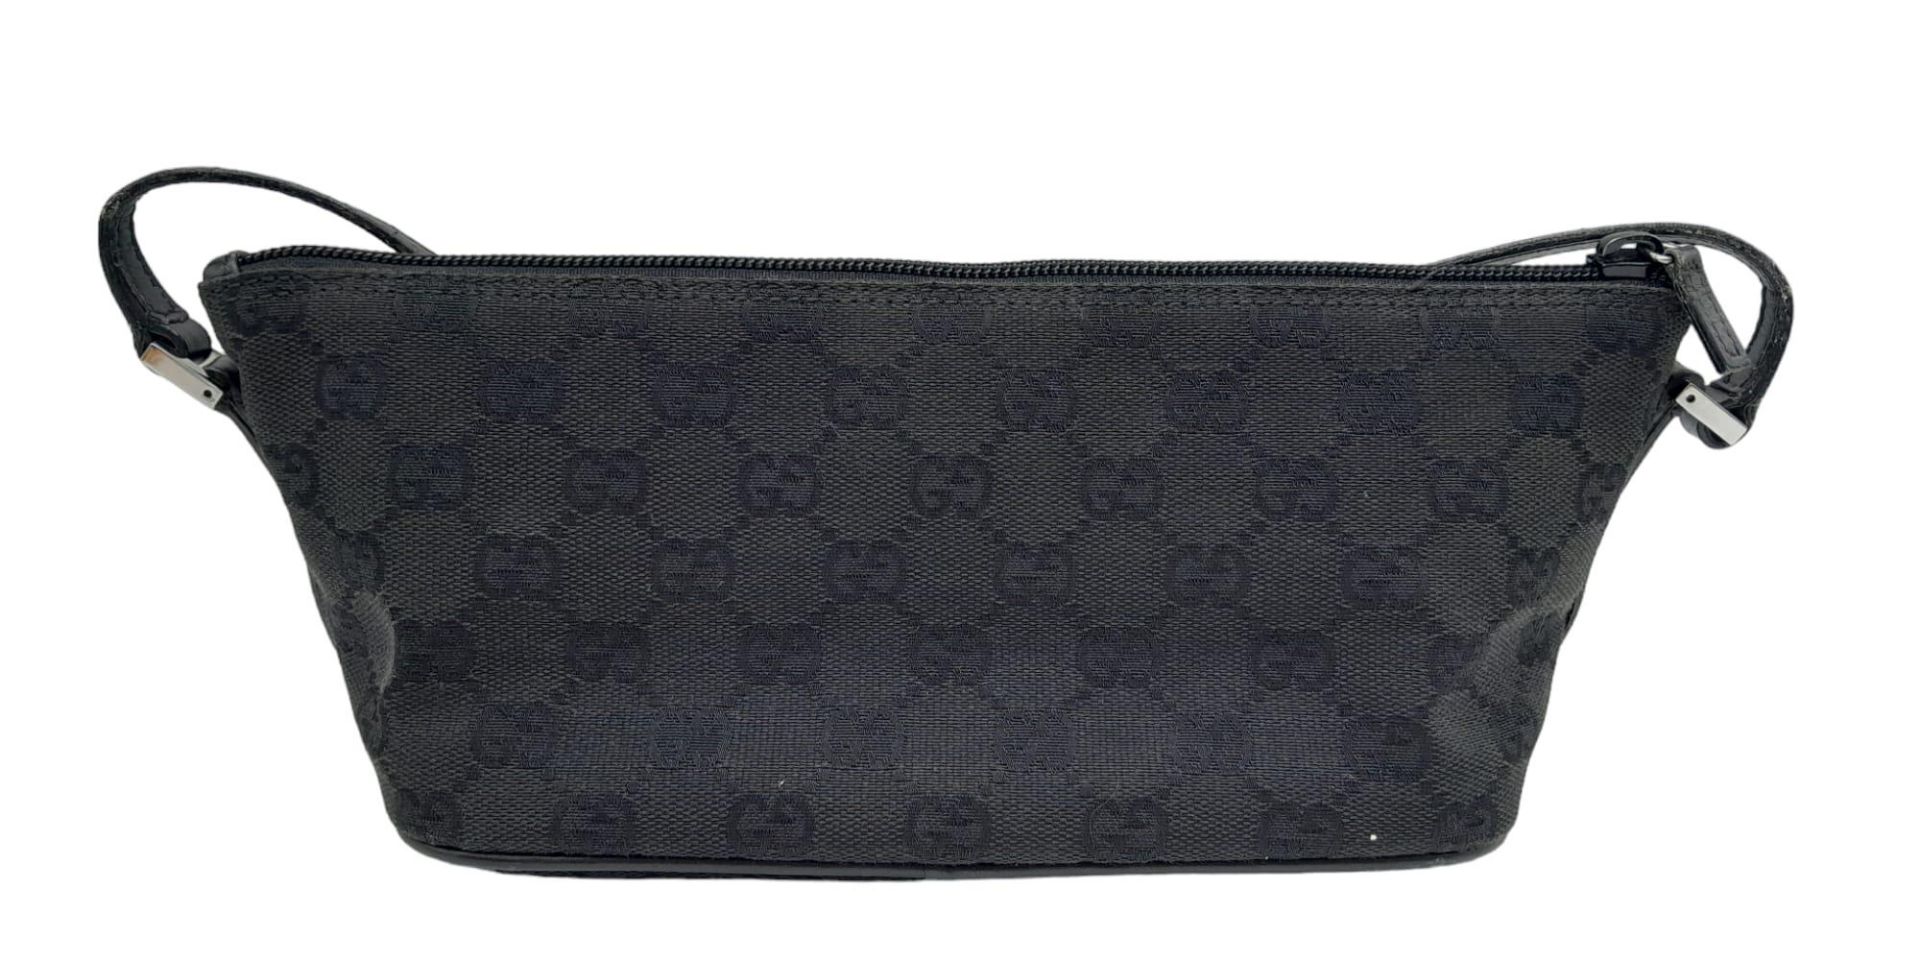 A Gucci Black Monogram Pochette Boat Bag. Textile exterior with black and silver-toned hardware, - Image 2 of 7